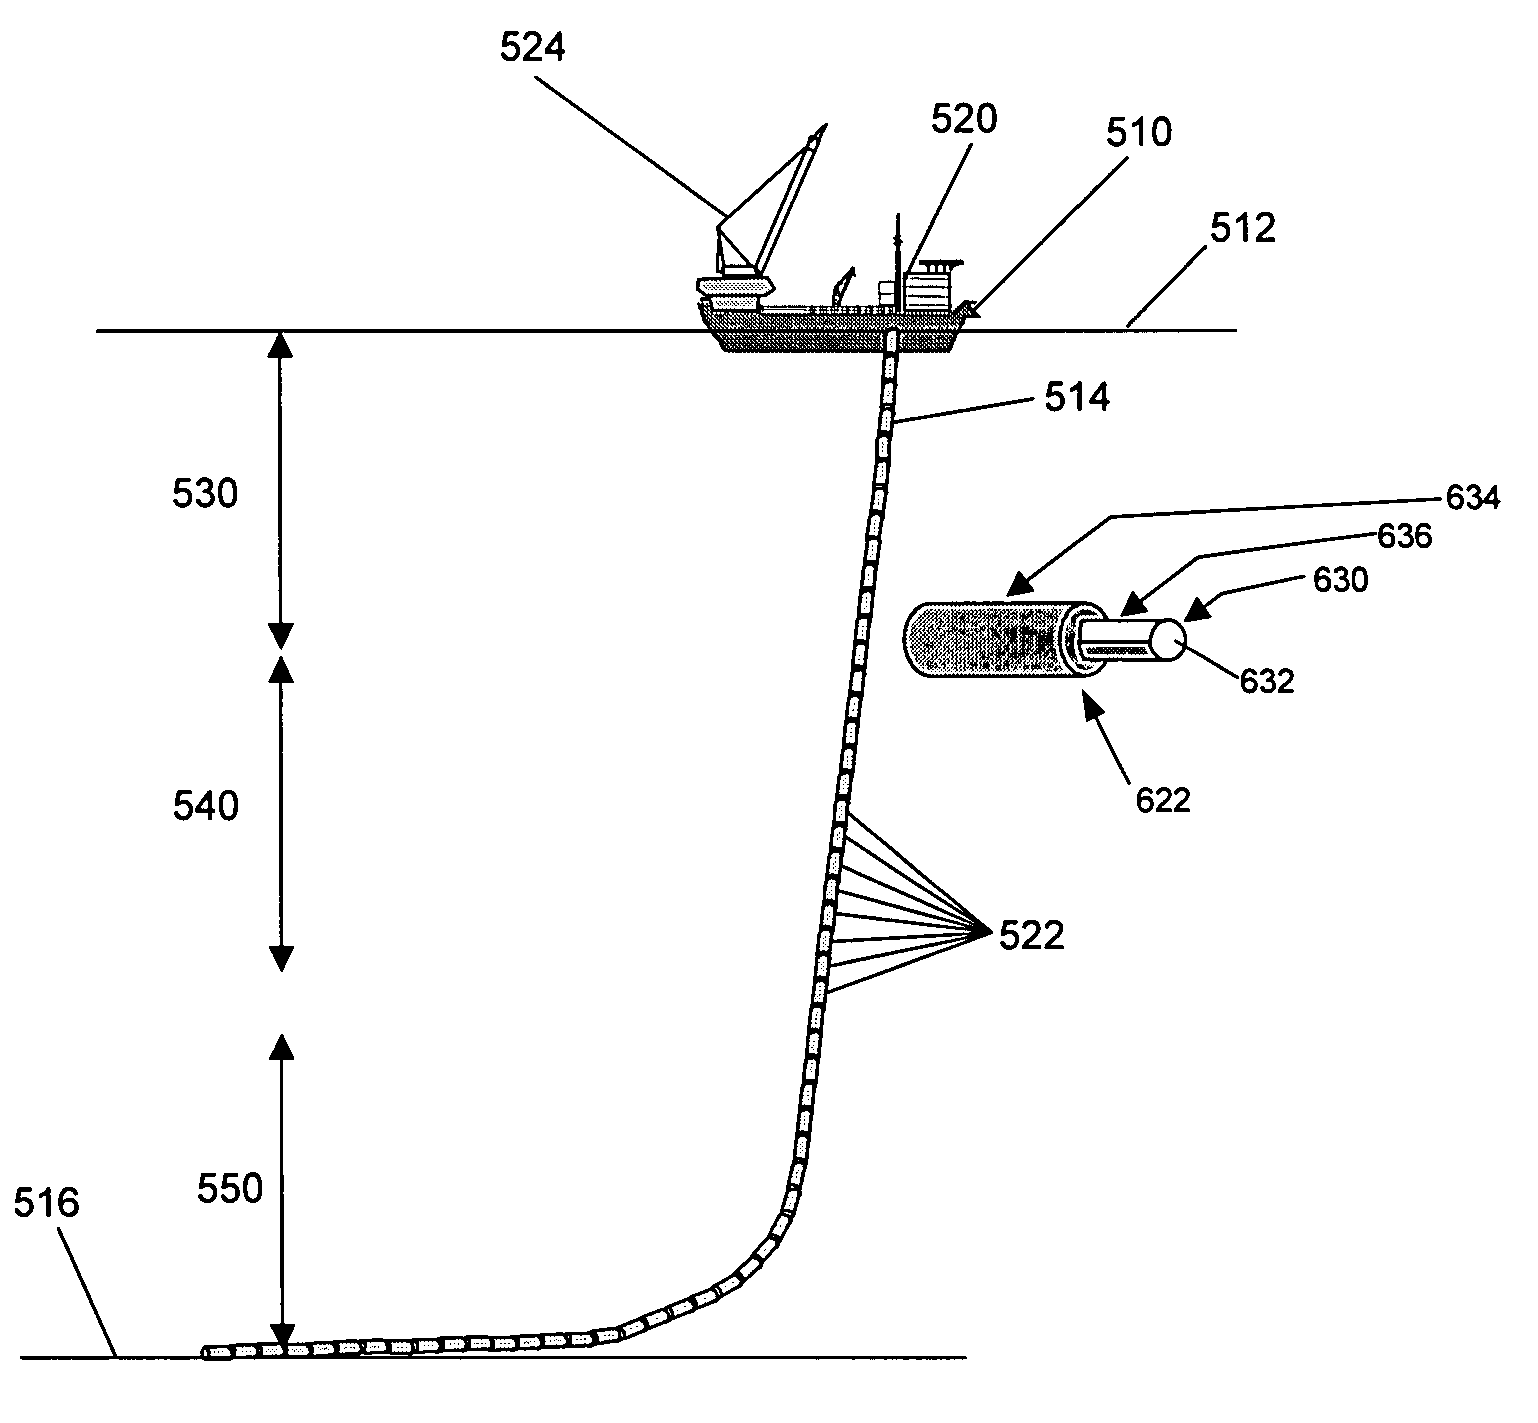 System and methods to install subsea structures